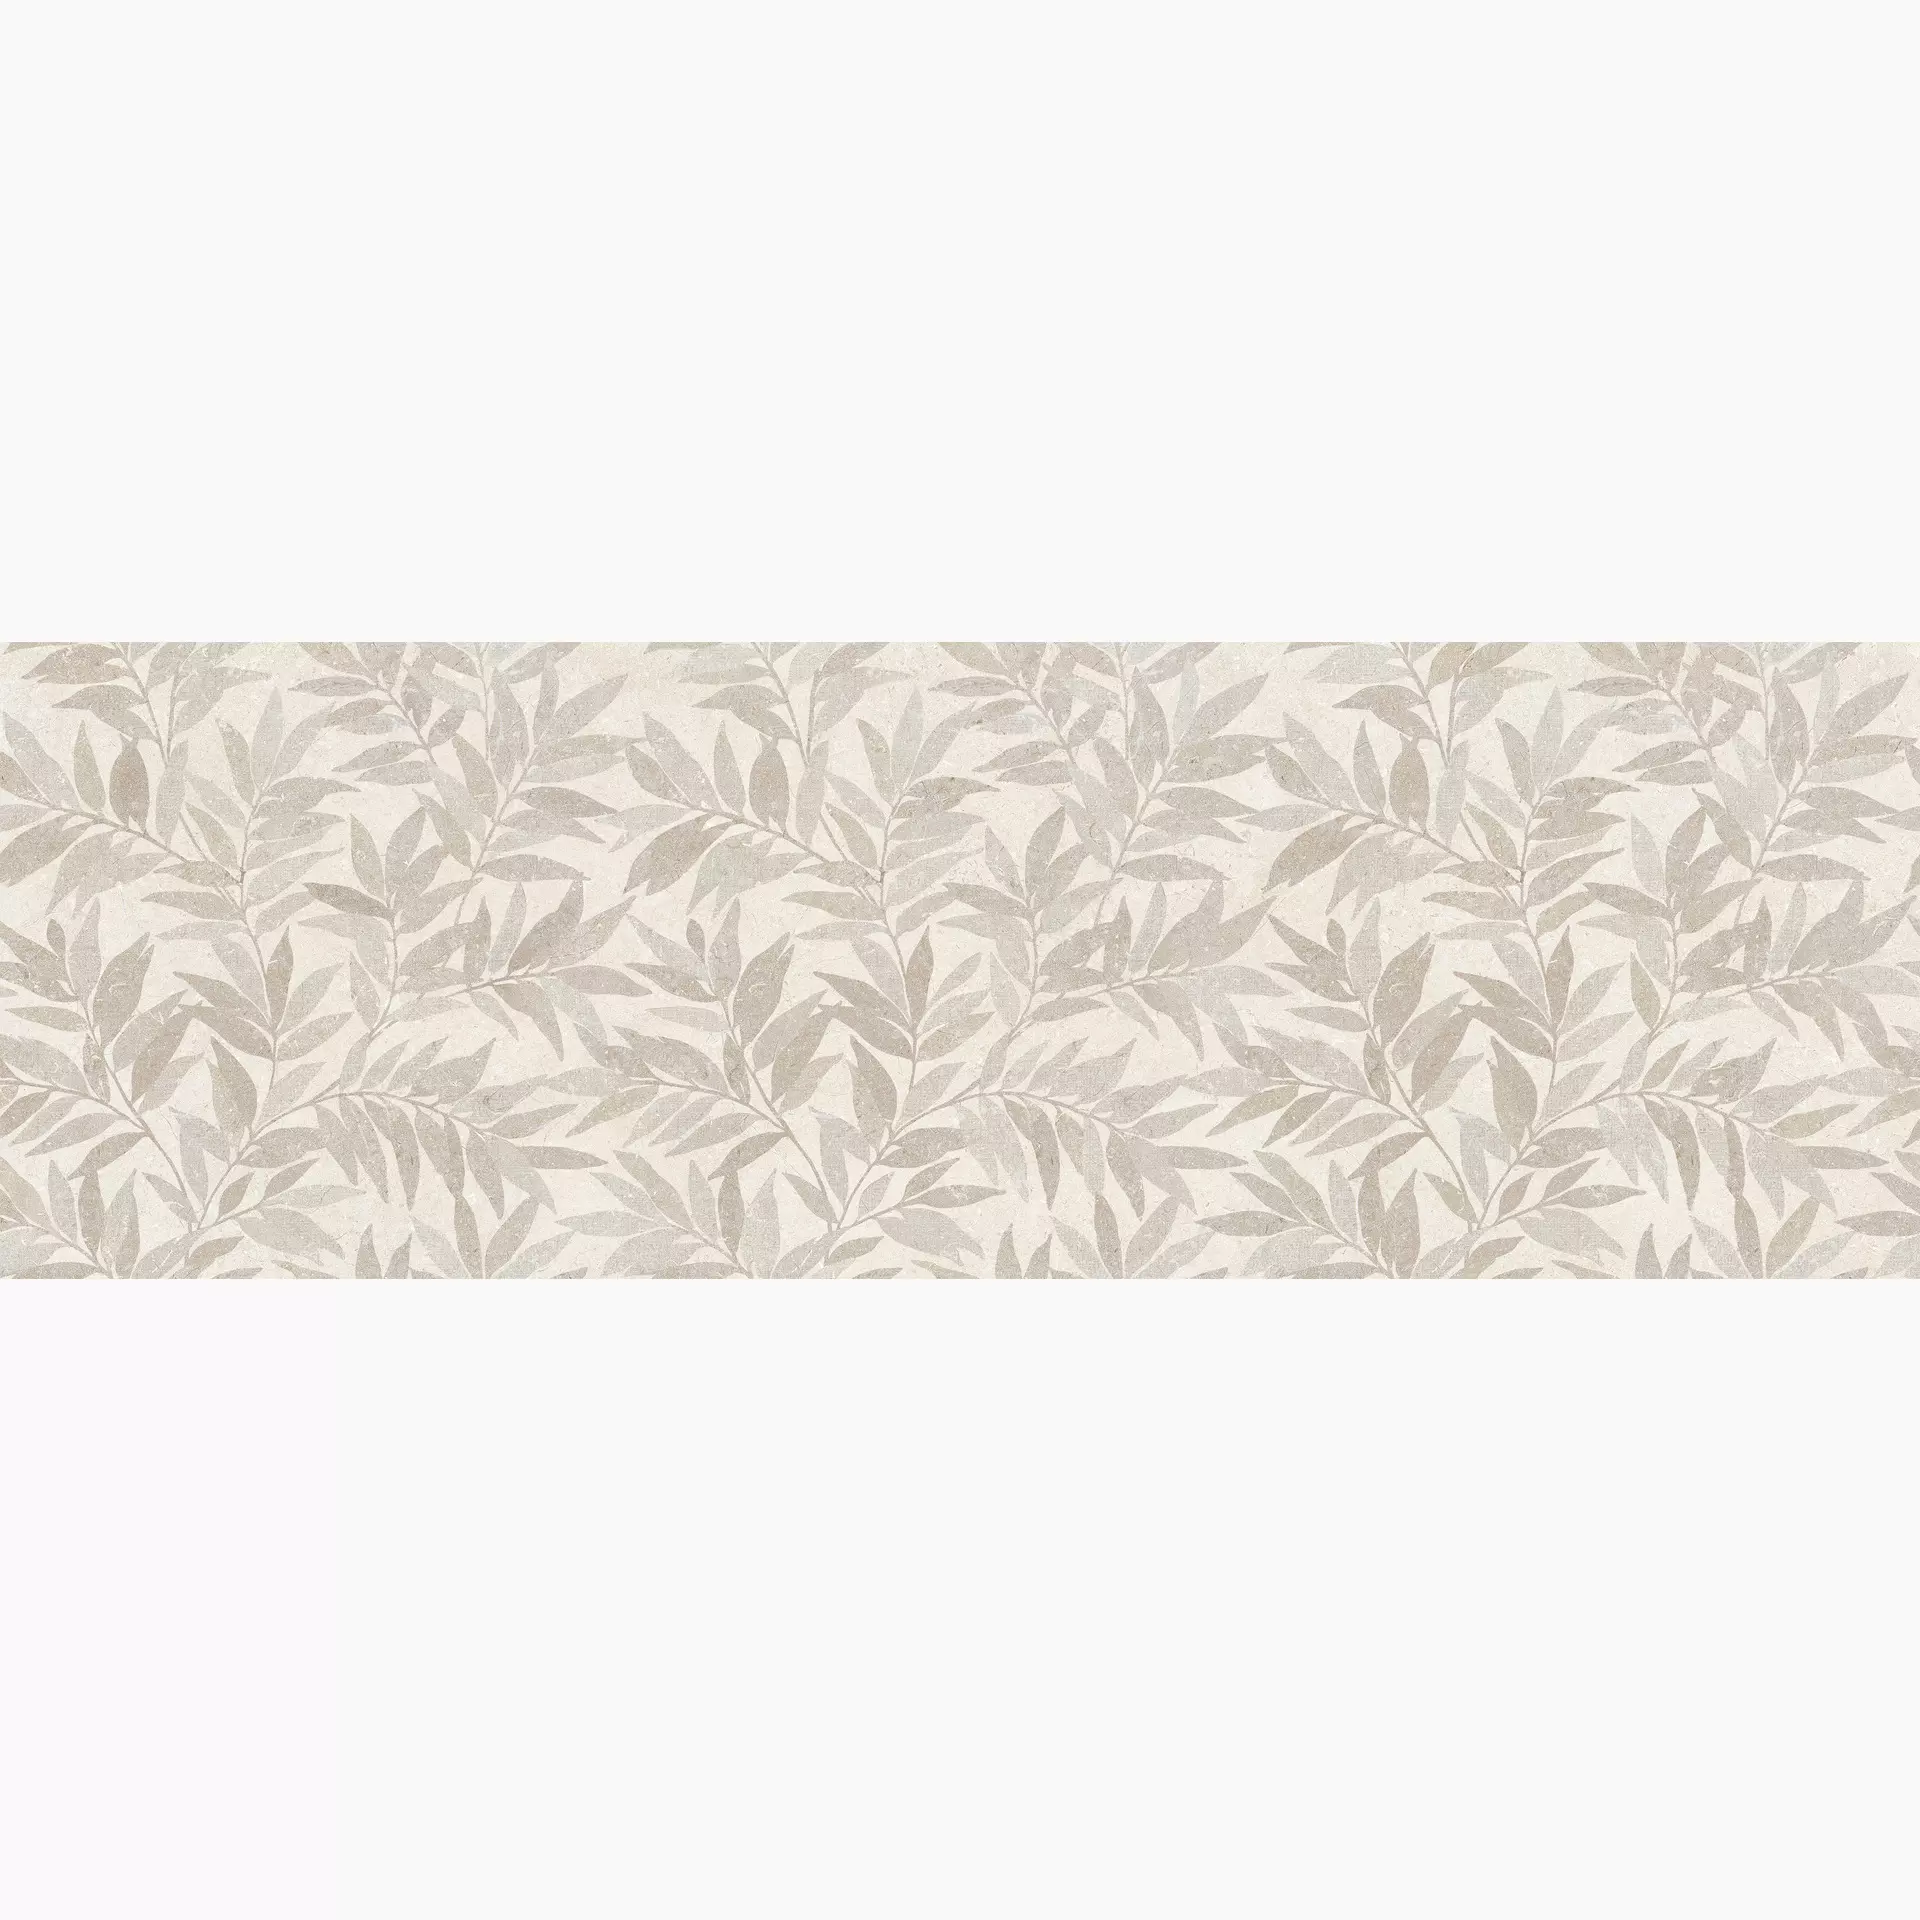 Marazzi Limestone Wall Ivory – Taupe Touch Decor Agrifolgio MFCP 40x120cm rectified 6mm